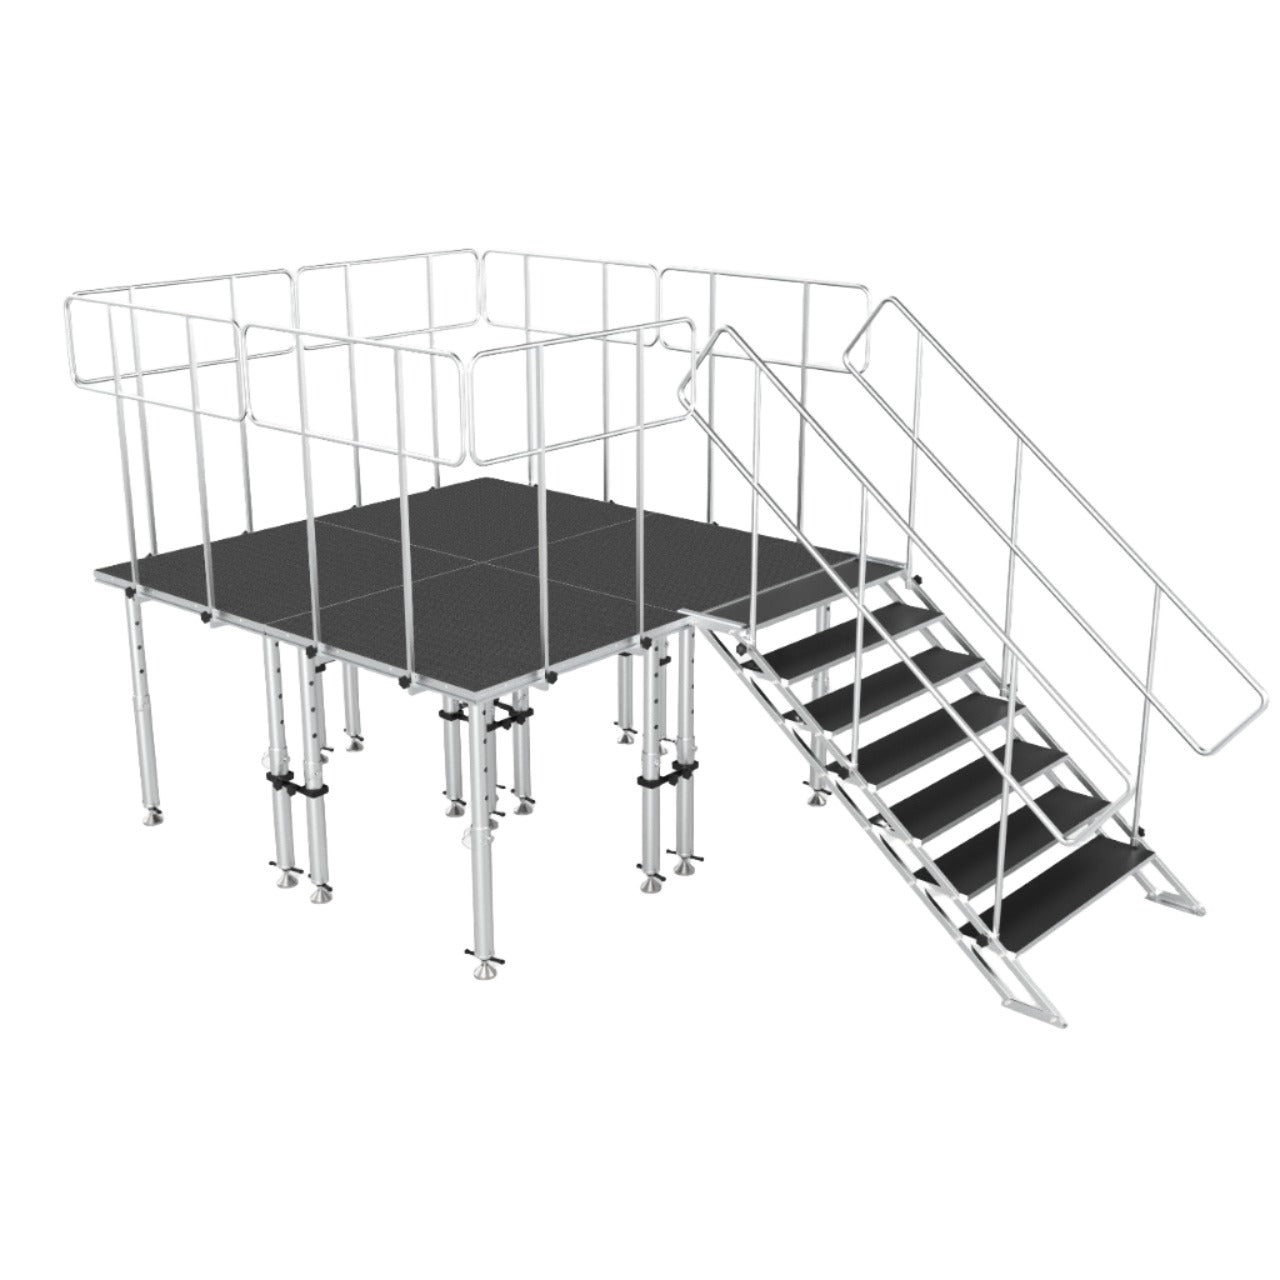 Pro X 8FT x 8FT Stage Q 2 Stage Platforms 3-Steps Social Distancing 4FT x 4FT Package Height Adjustable 28-48 inch XSQ-8X8PKG-44GRUST3